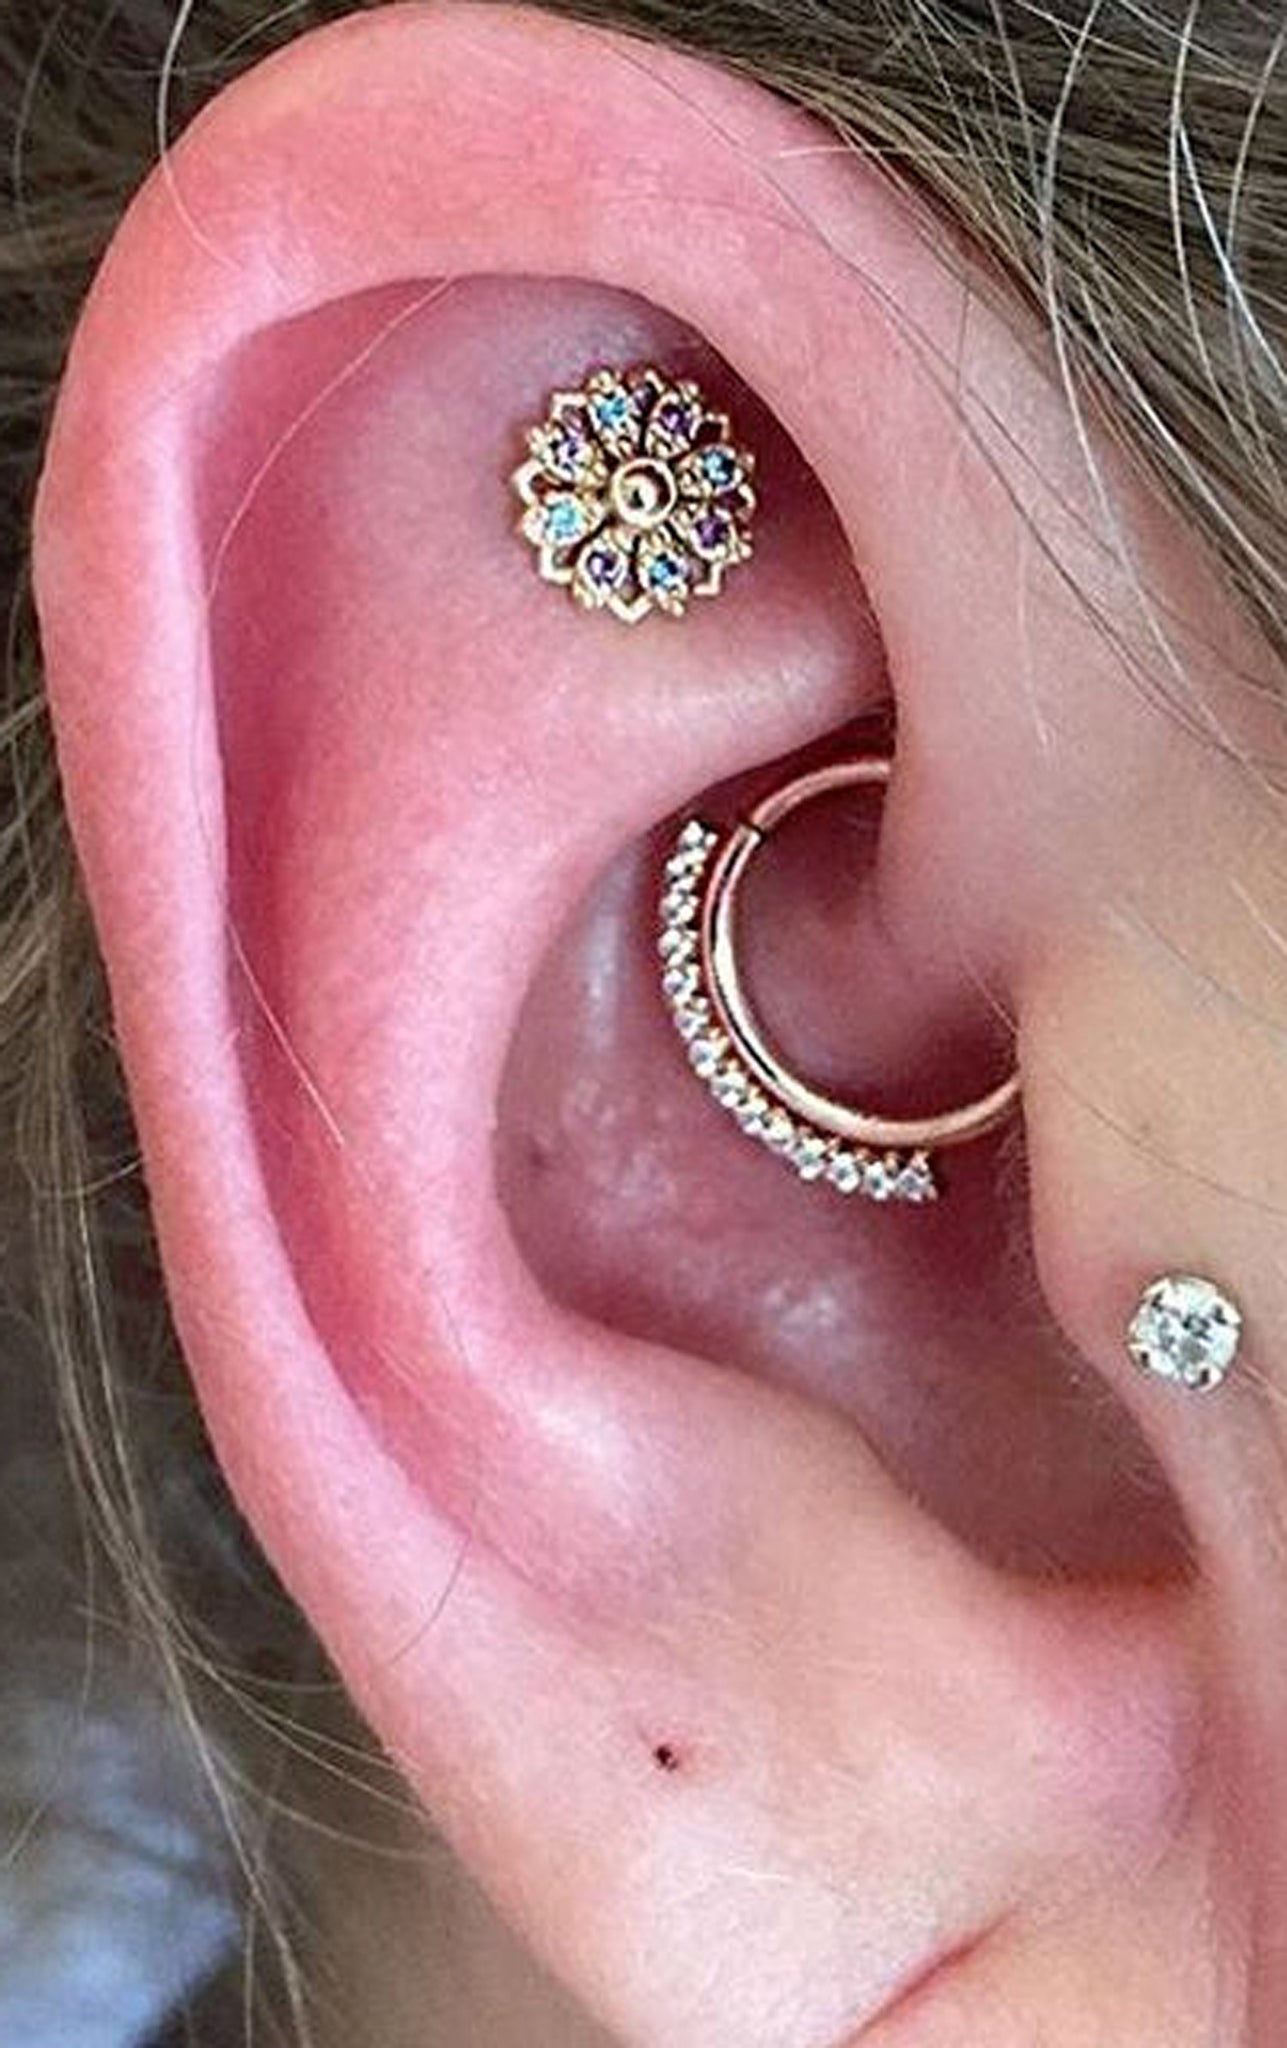 Celebrity Ear Piercing Ideas Combinations at MyBodiArt.com - Gold Daith Ring Hoop 16G - Constellation Earring - Tragus Stud  